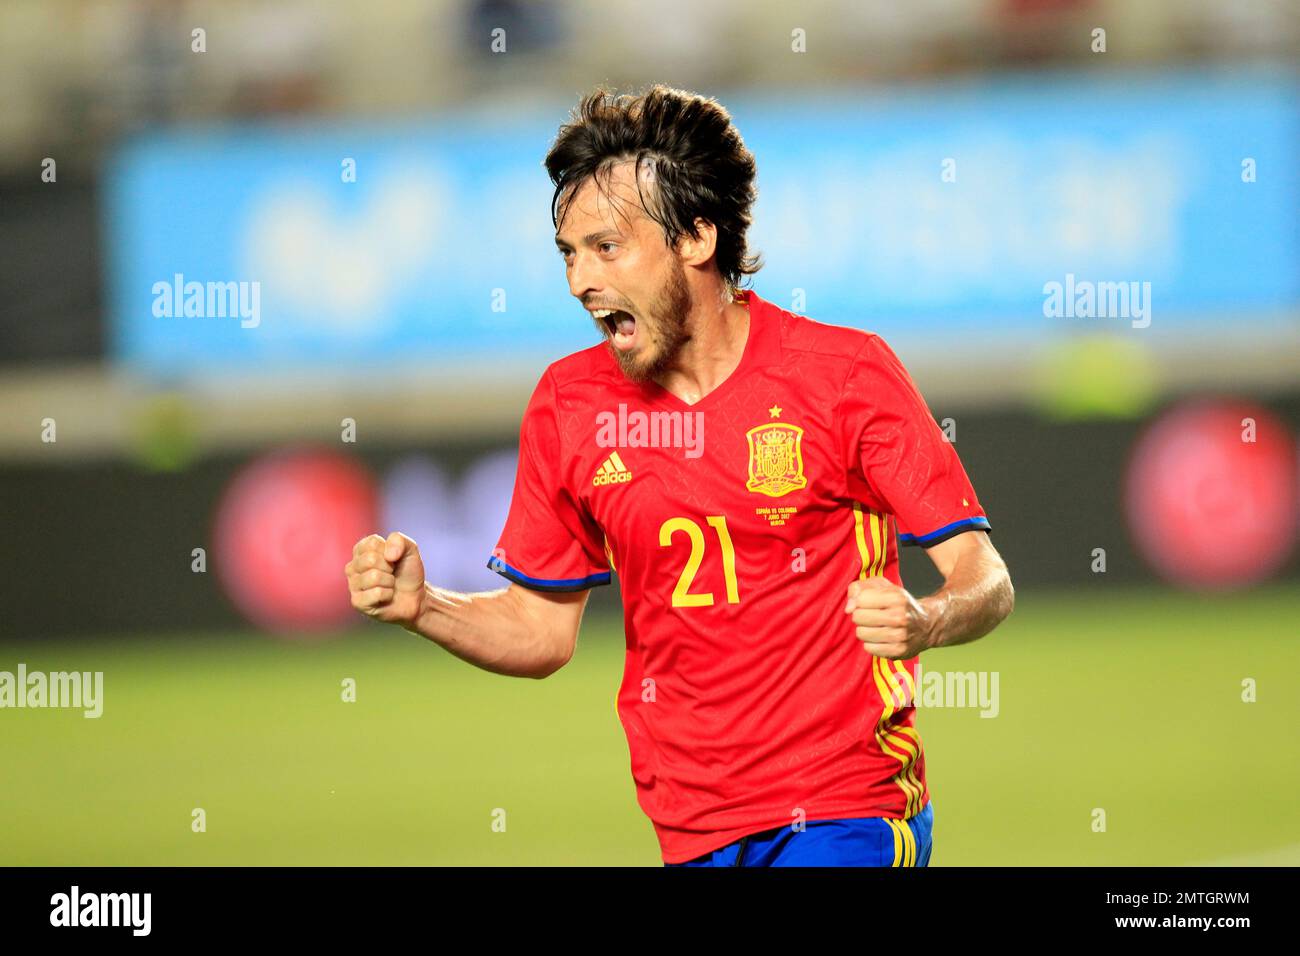 Spain's David Silva celebrates after scoring against Colombia during the  international friendly soccer match between Spain and Colombia at the  Estadio Nueva Condomina in Murcia, Spain, Wednesday, June 7, 2017. (AP  Photo/Alberto